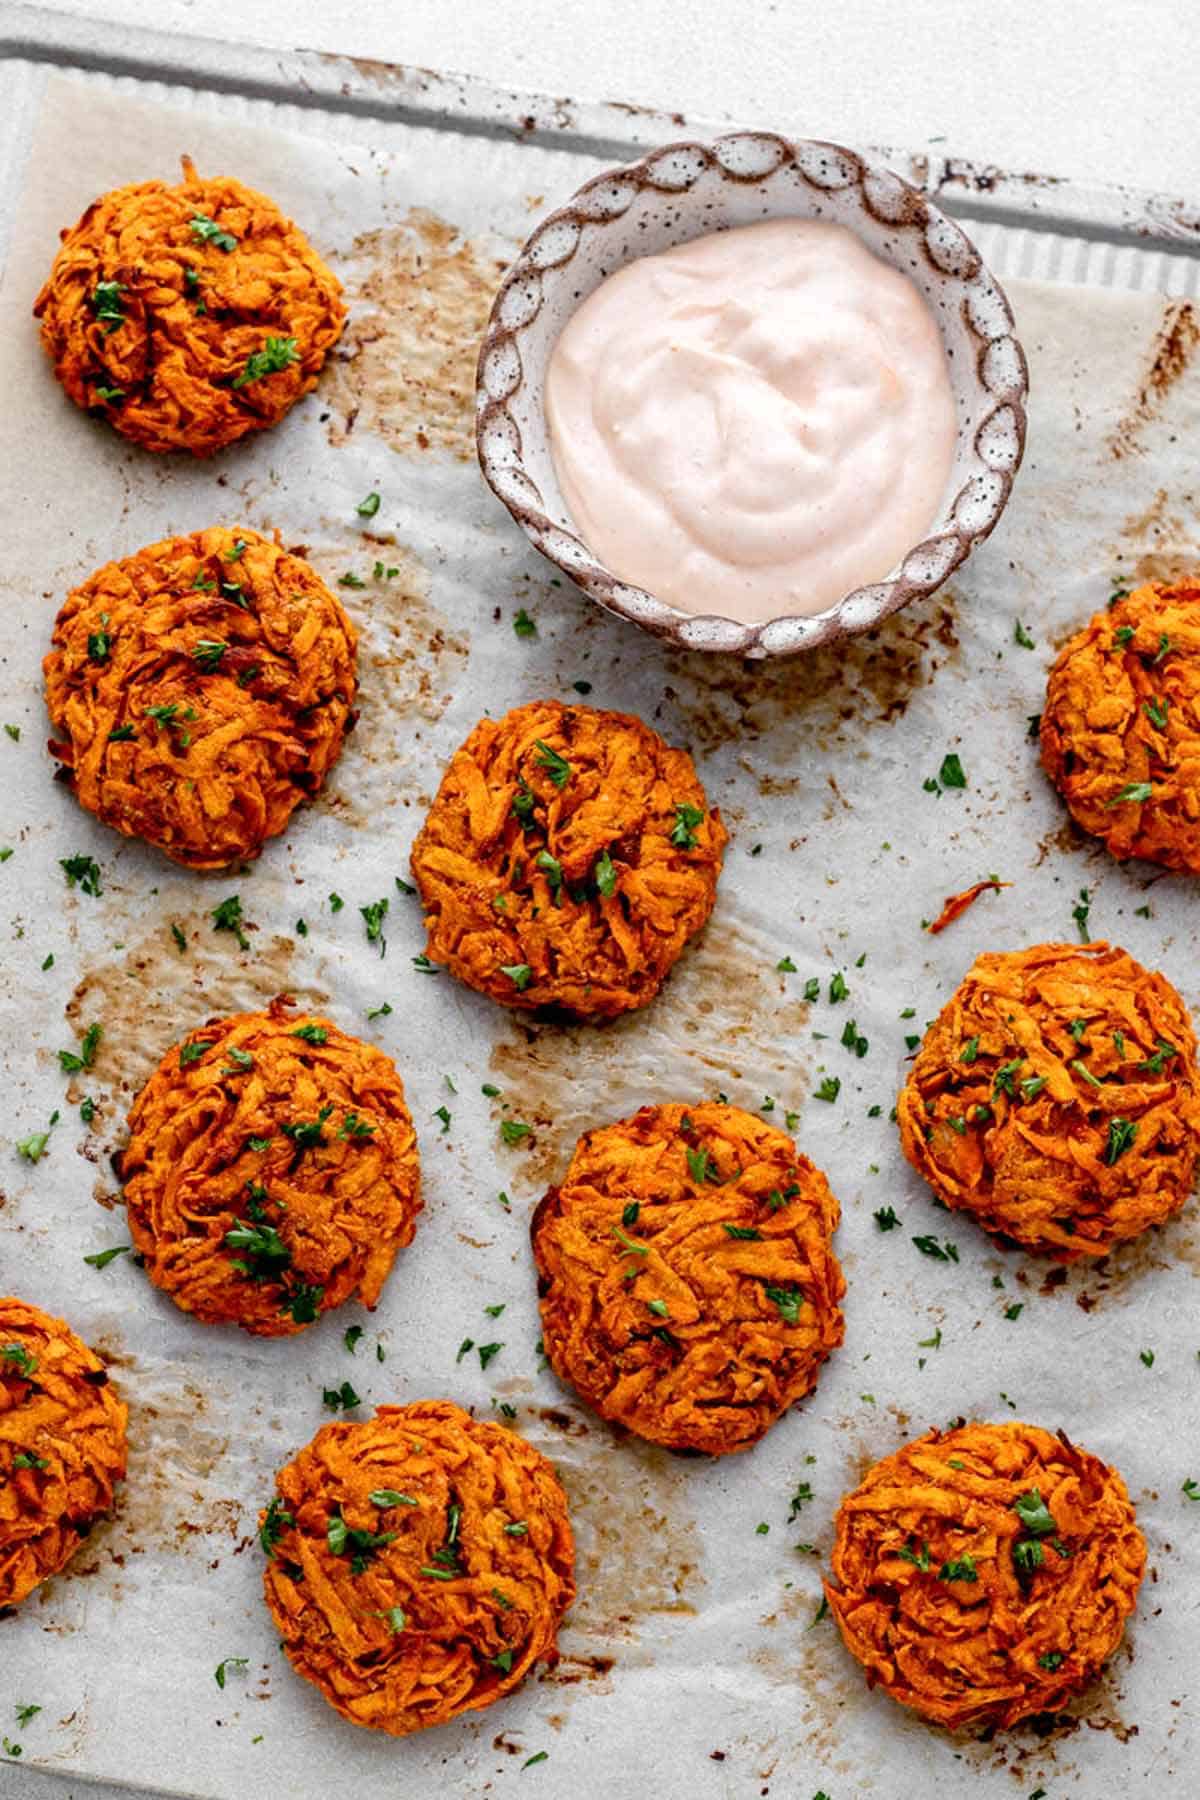 Overhead image of crispy sweet potato fritters on a parchment-lined baking sheet next to a bowl of dip.